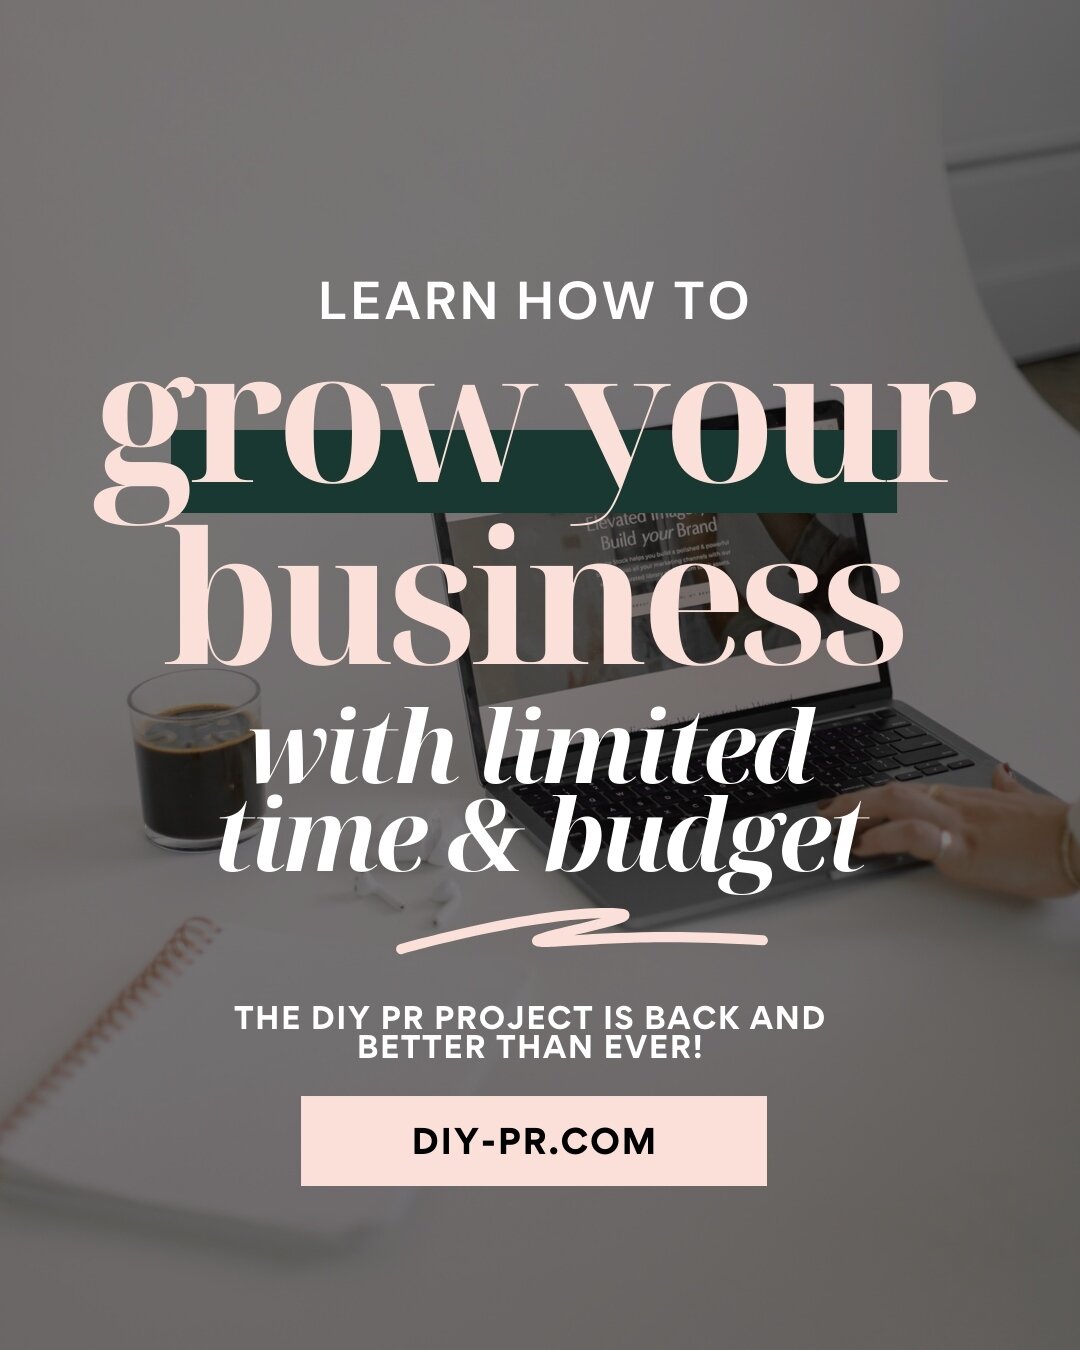 &quot;This was EXACTLY what I needed!&quot; ⁠
⁠
Supporting small businesses has always been a mission of ours at FACTEUR PR since we first opened our doors in 2016. With the reboot of our signature program, The DIY PR Project, we are making it easier